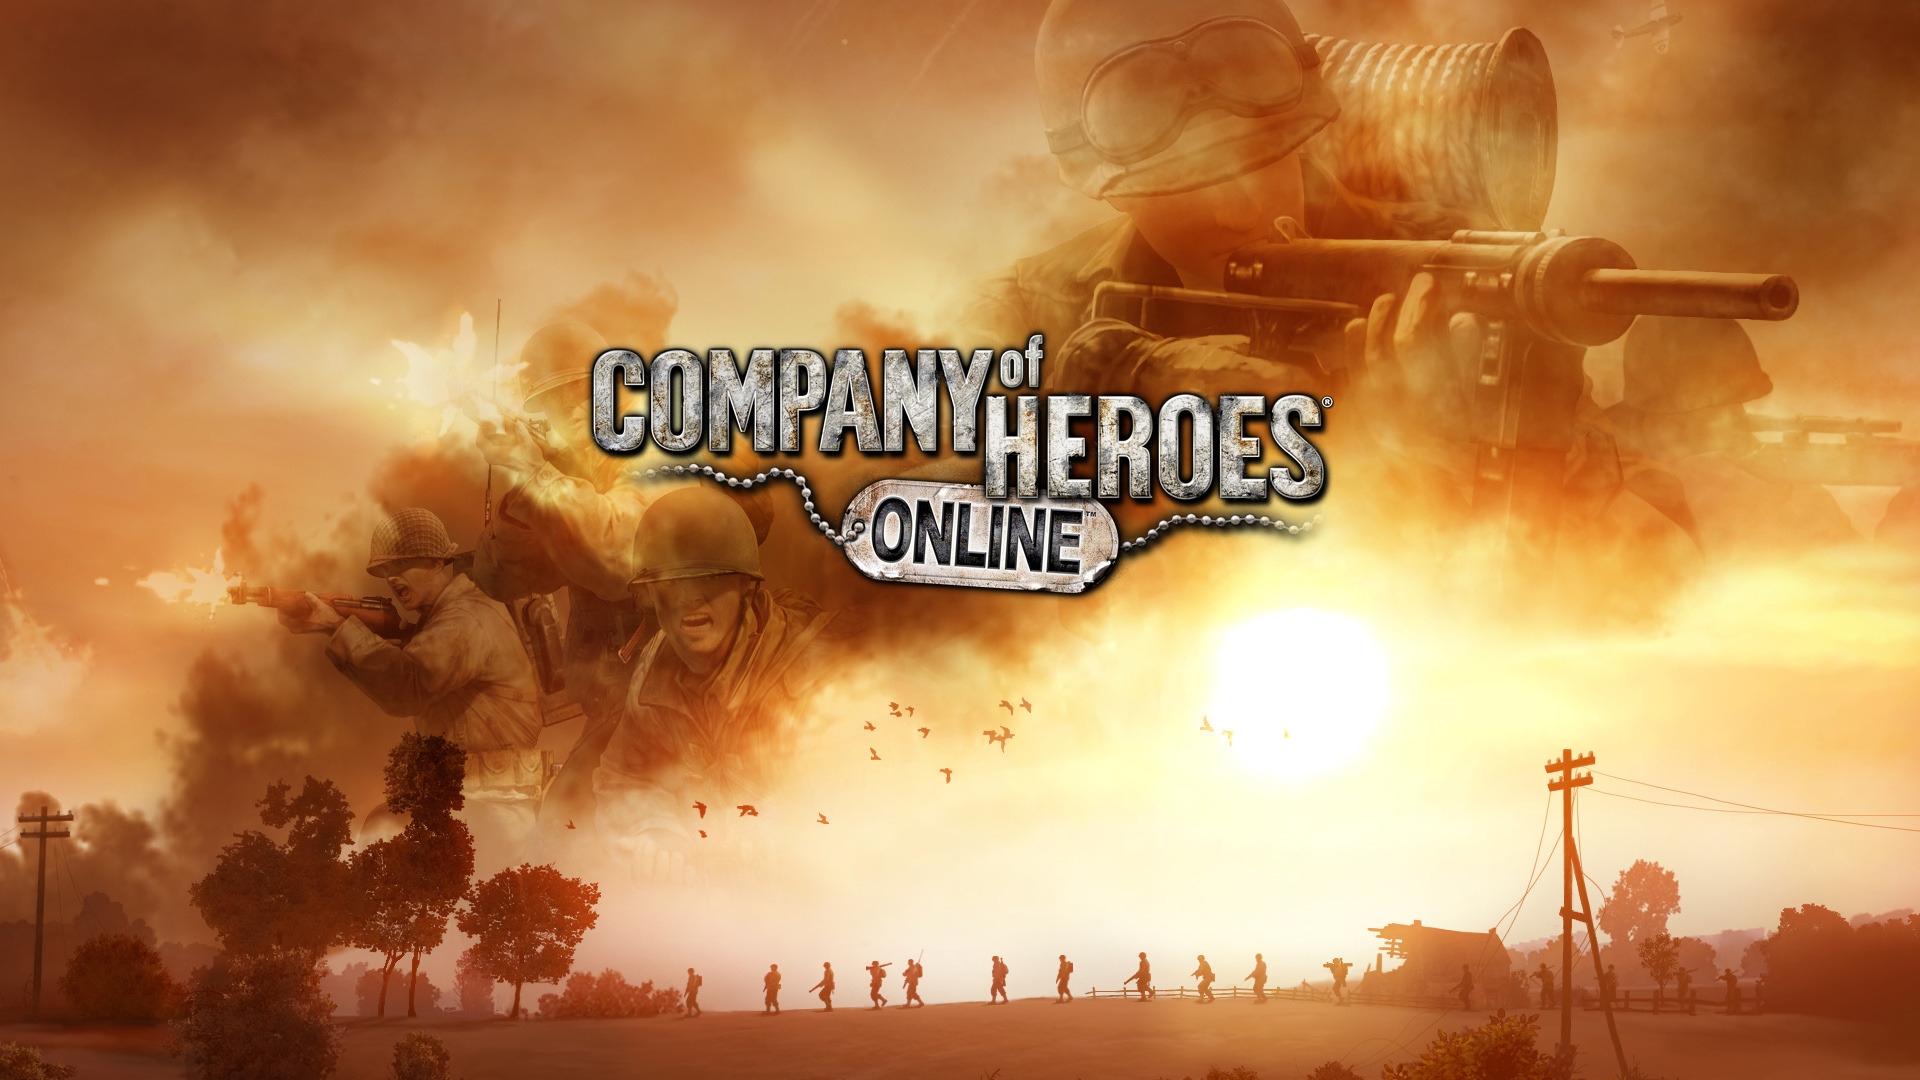 Company of Heroes Online for 1920 x 1080 HDTV 1080p resolution